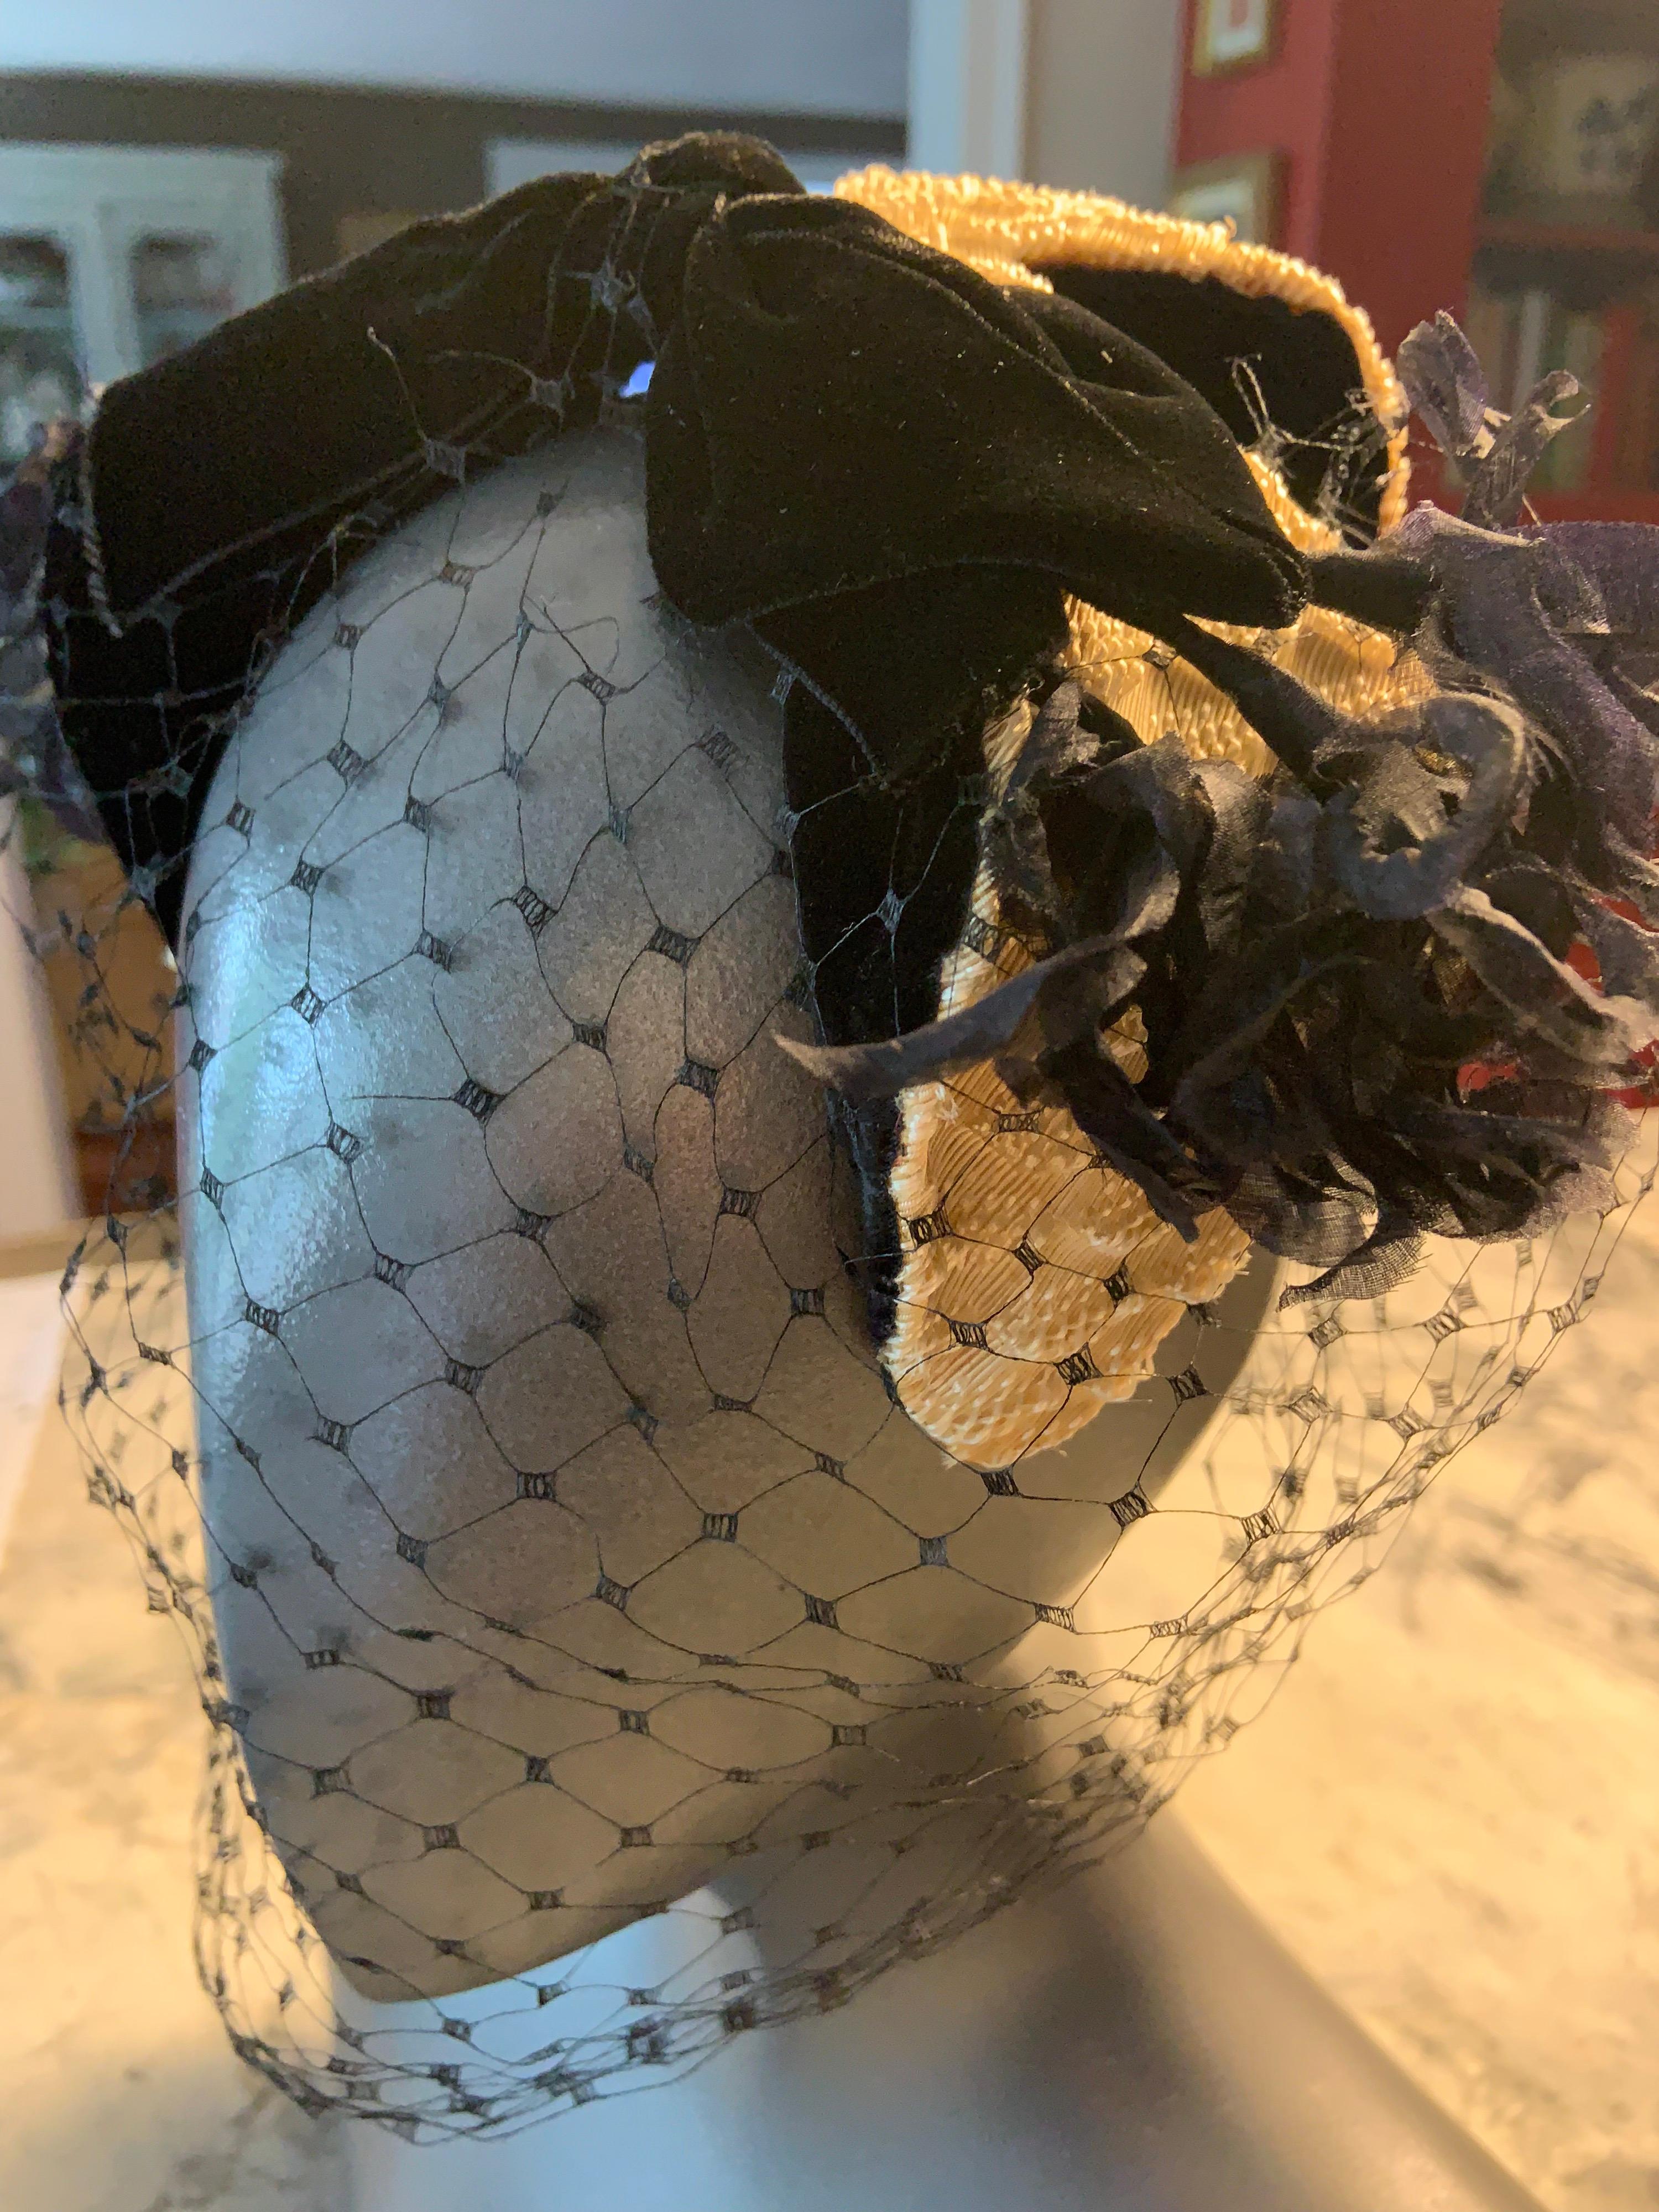 Silk organza flowers, black velvet, point d'esprit veiling and a novelty silk faille  fabric are all used to create this cocktail hat designed by Bill Cunningham before he became famous as a New York Times photographer. The hat is in excellent